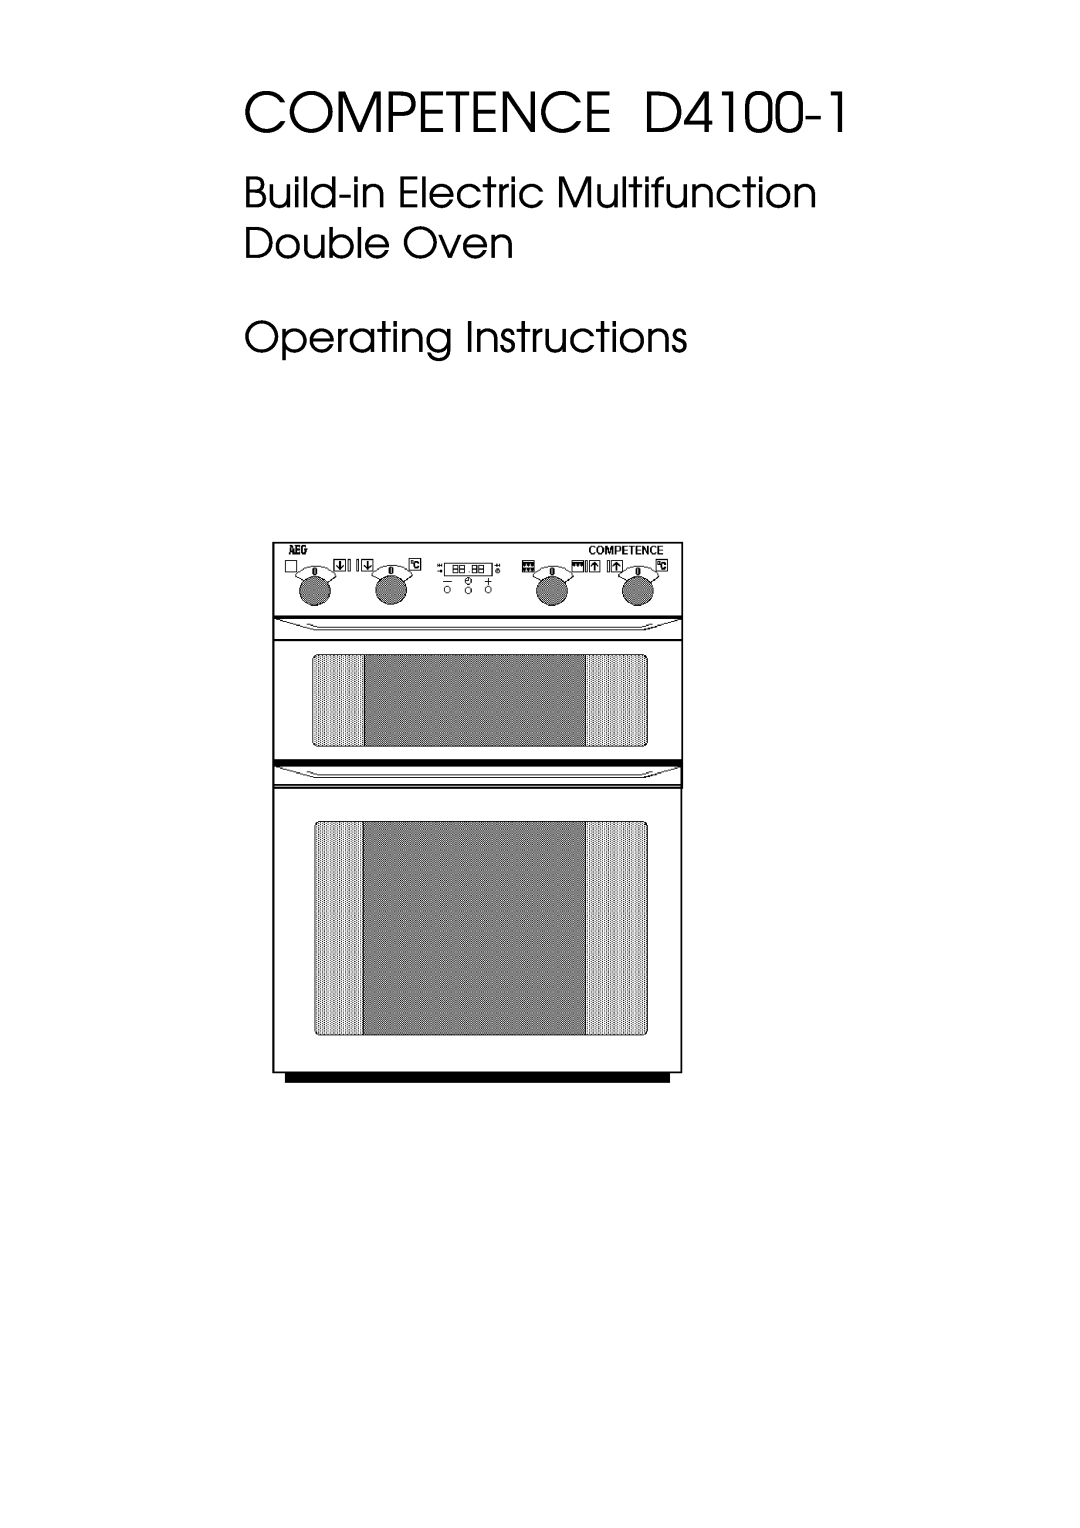 Electrolux operating instructions COMPETENCE D4100-1 